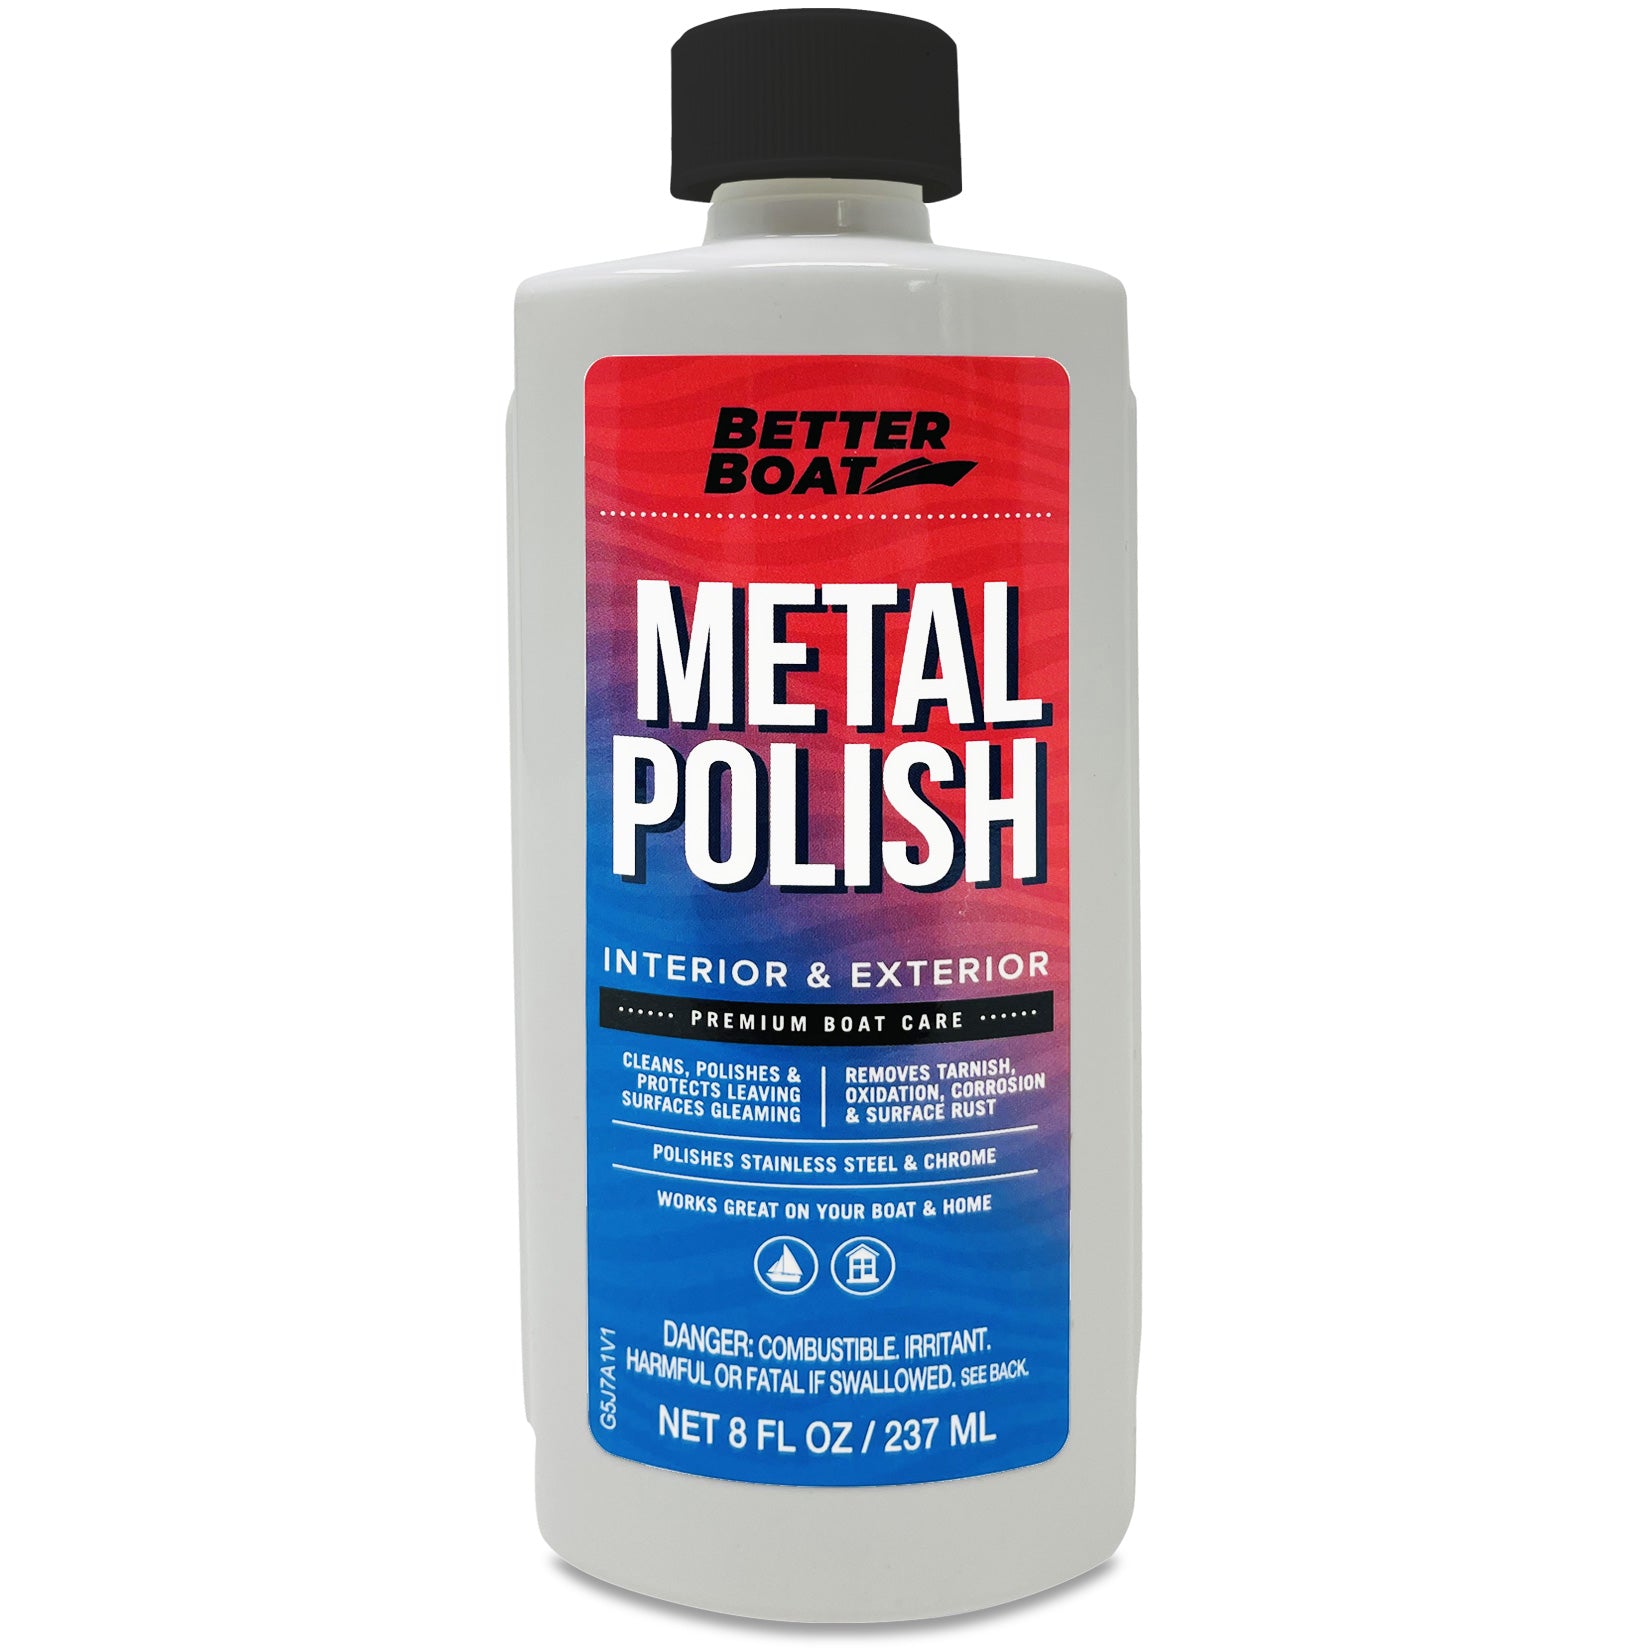 Stainless Steel Polish & Protectant